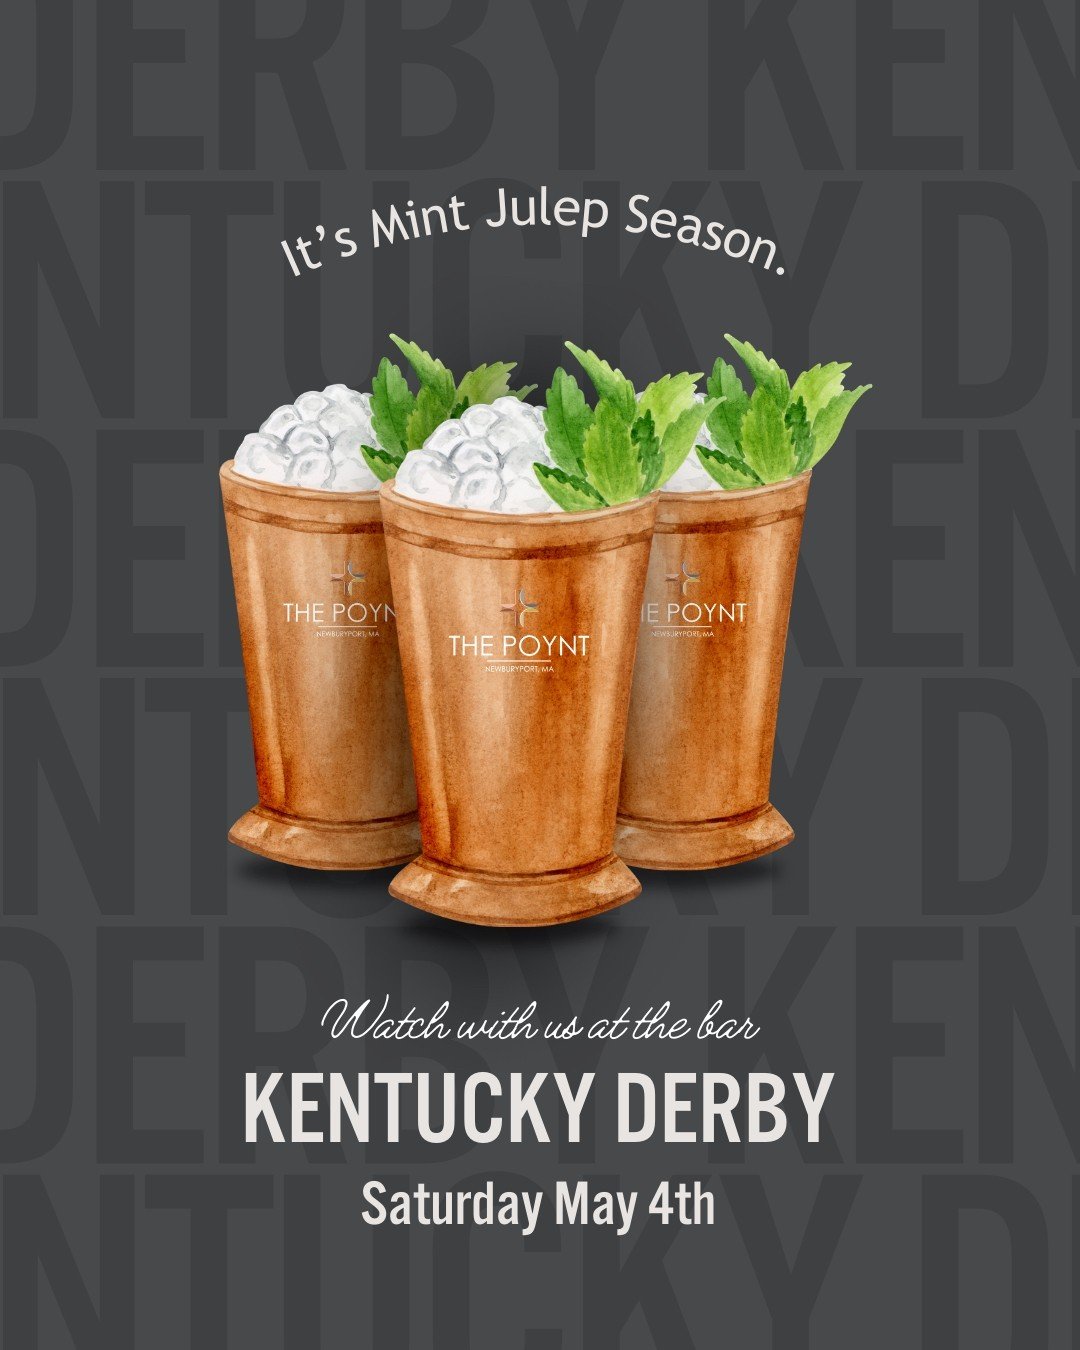 Mint Juleps and an excuse to wear your favorite hat; that's how we Derby here at The Poynt. 🐎👒⁠
⁠
Join us today, Saturday May 4th, at the bar to watch The @kentuckyderby while you sip on our cocktail special, a Blackberry Mint Julep!⁠
⁠
⁠
-⁠
-⁠
-⁠
